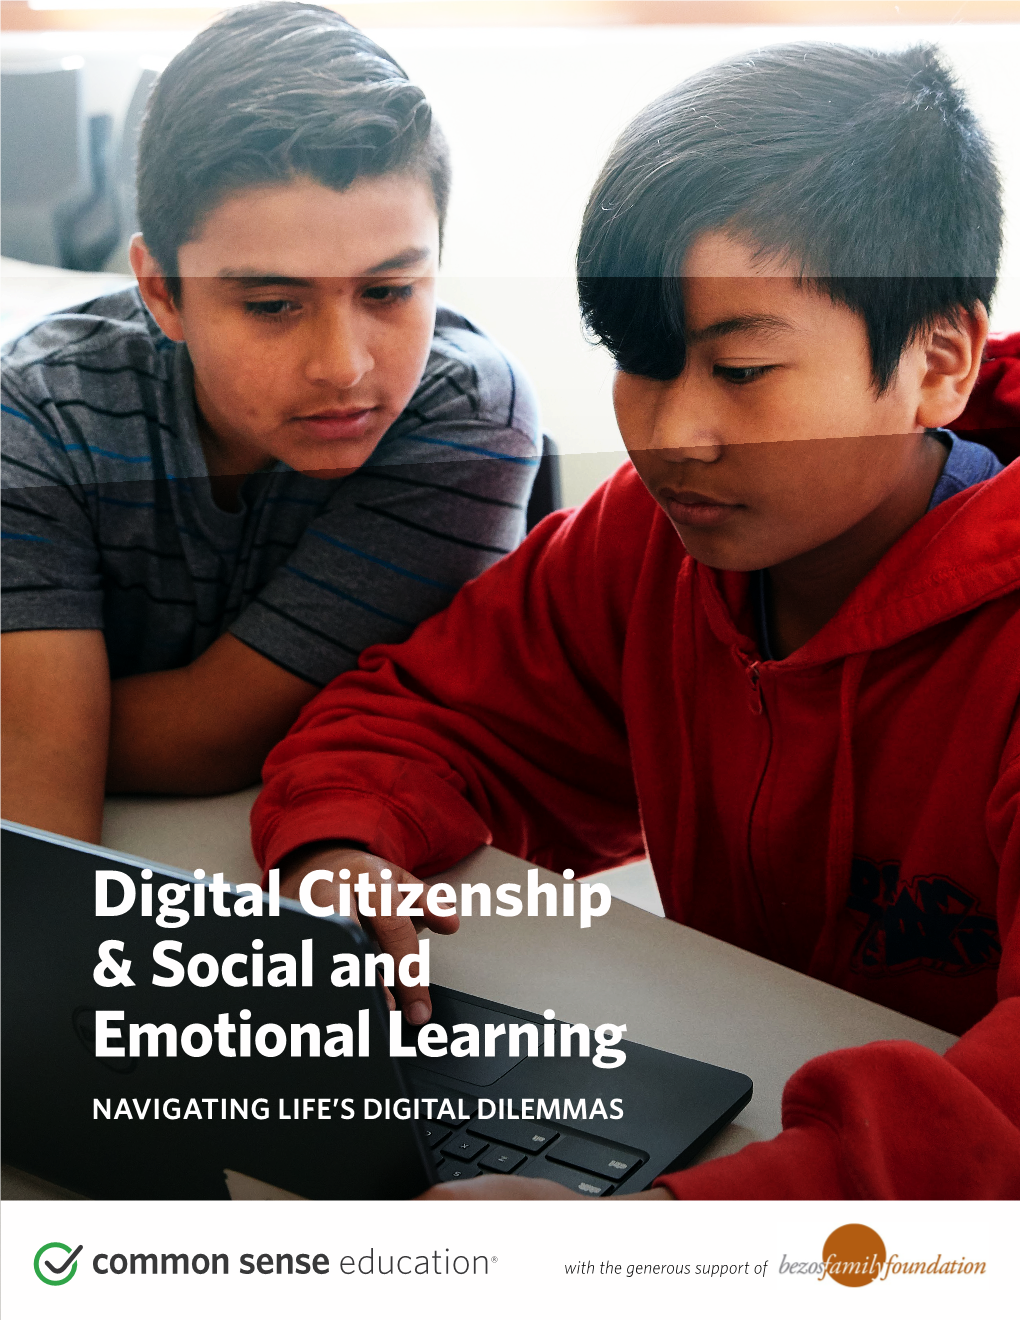 Digital Citizenship & Social and Emotional Learning